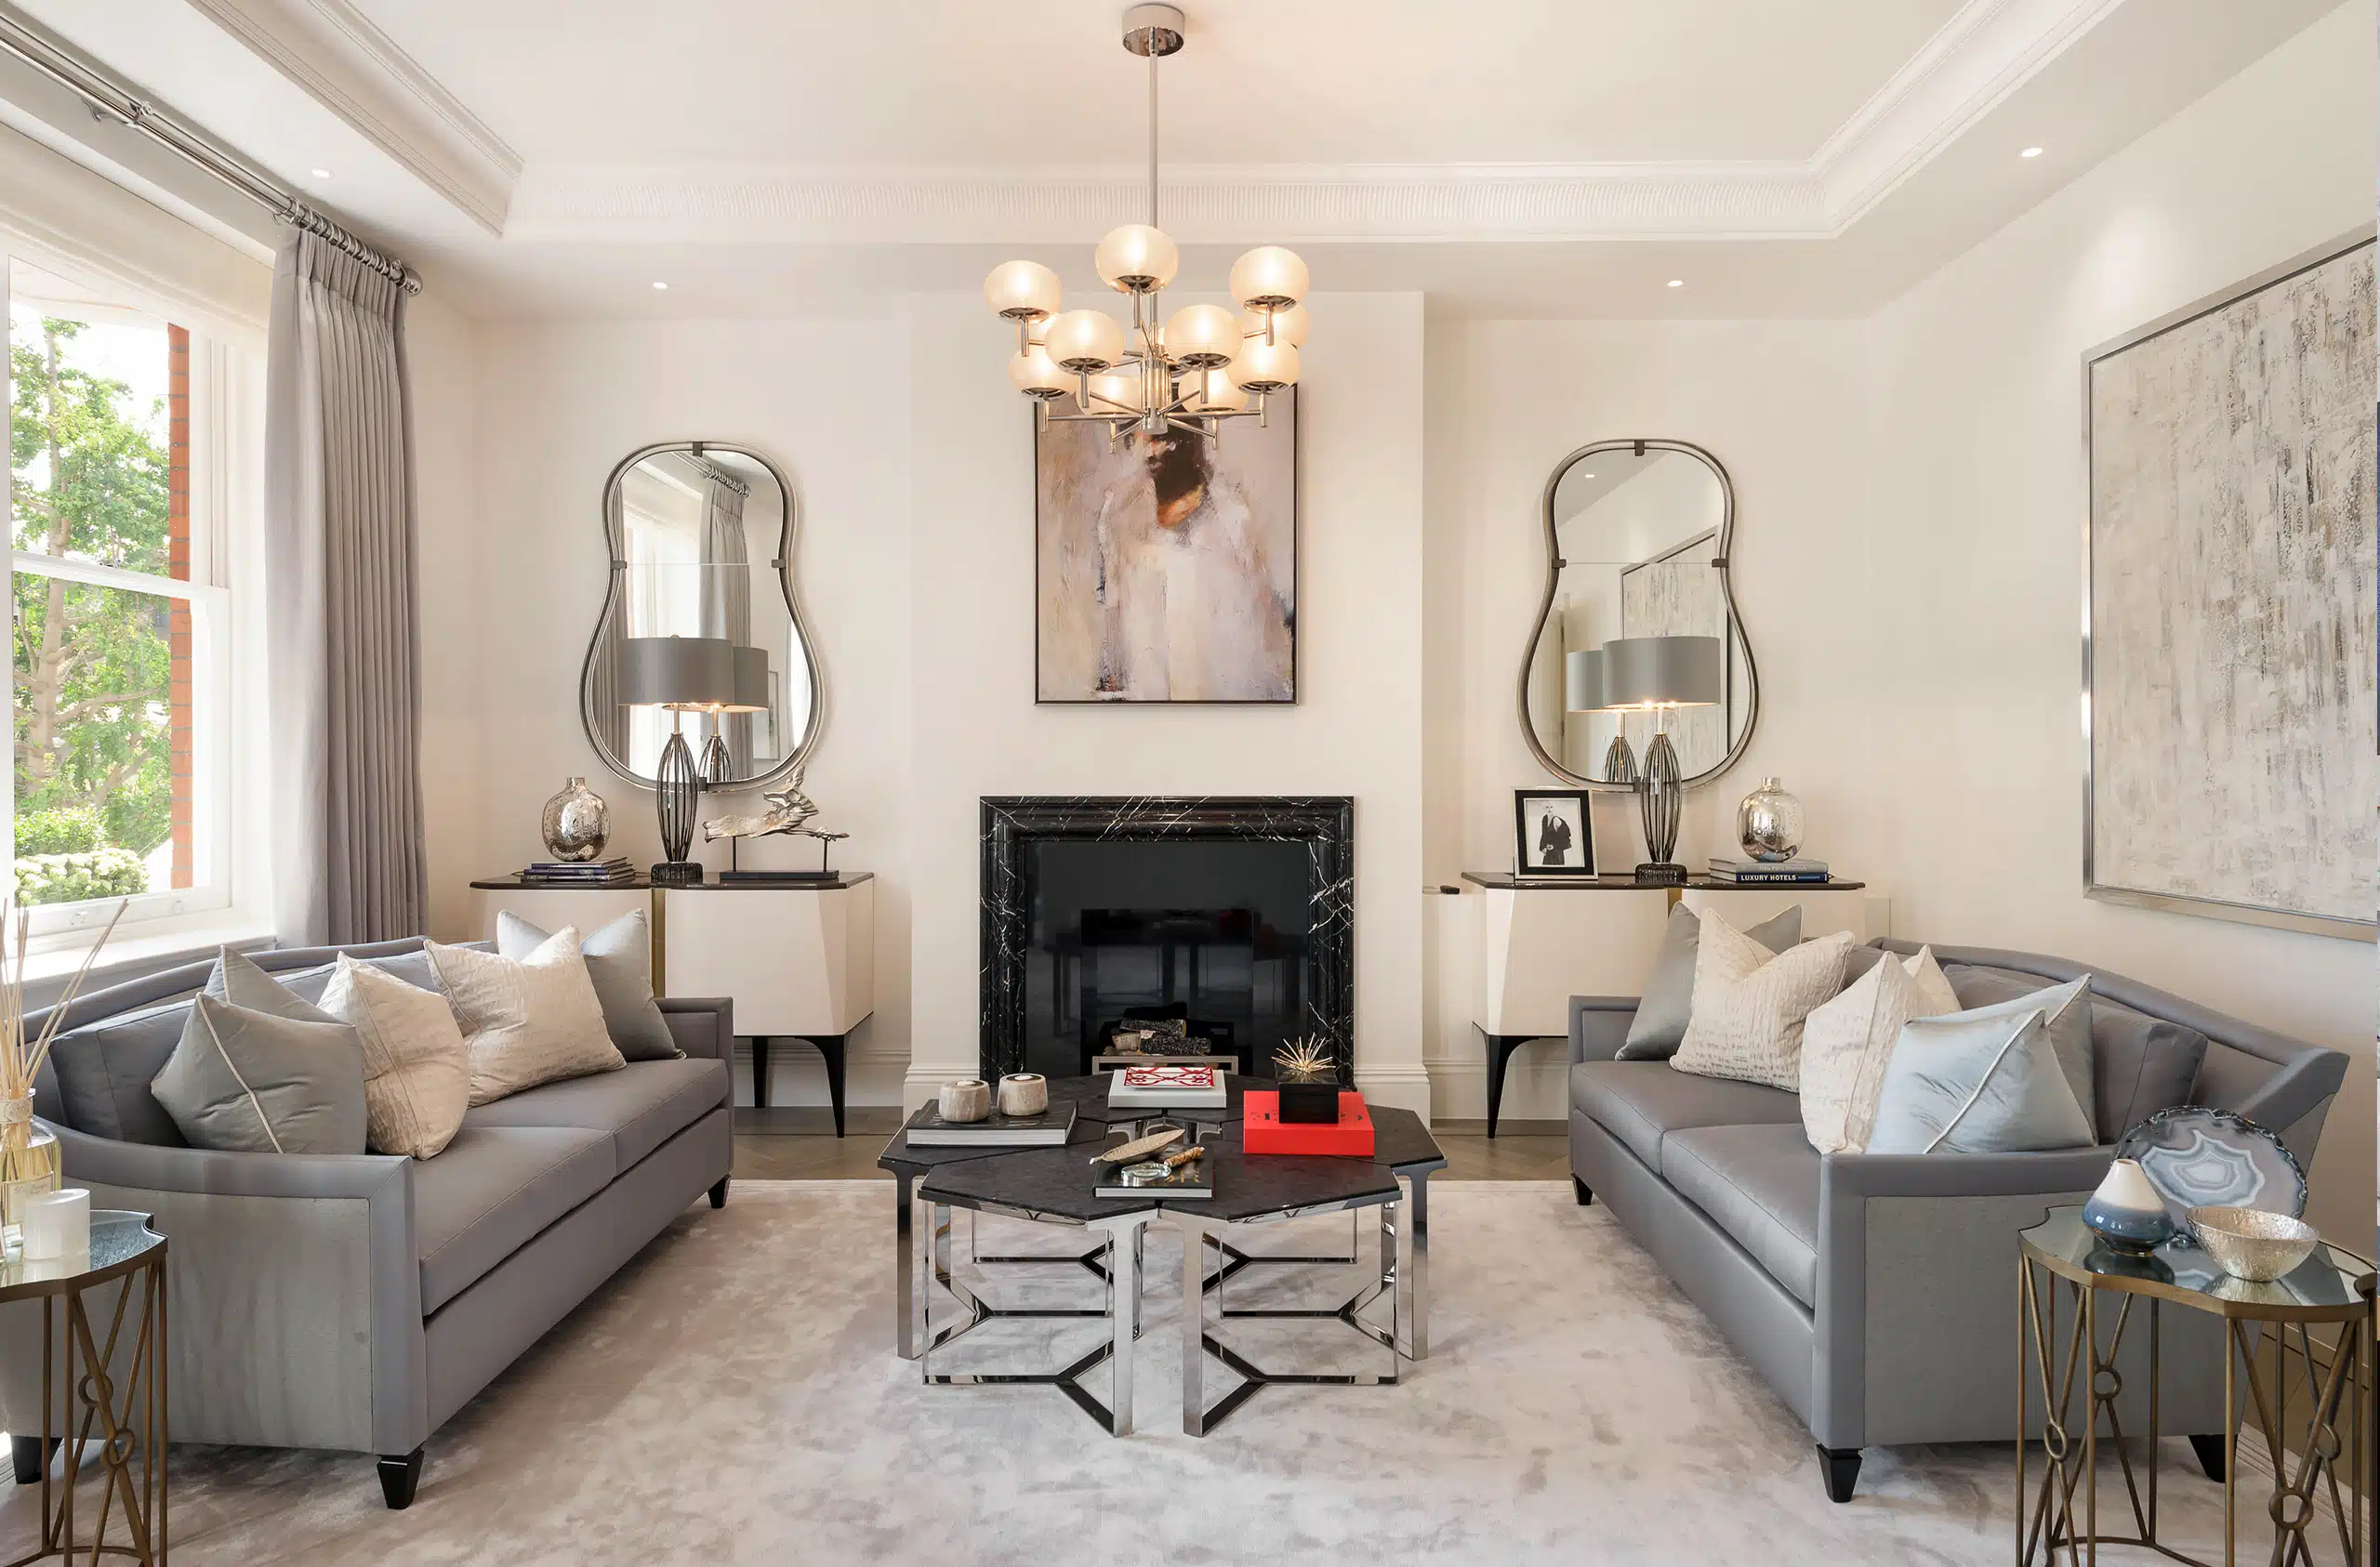 Living room at a london townhouse interior design project by katharine pooley, one of the best interior designers in the uk